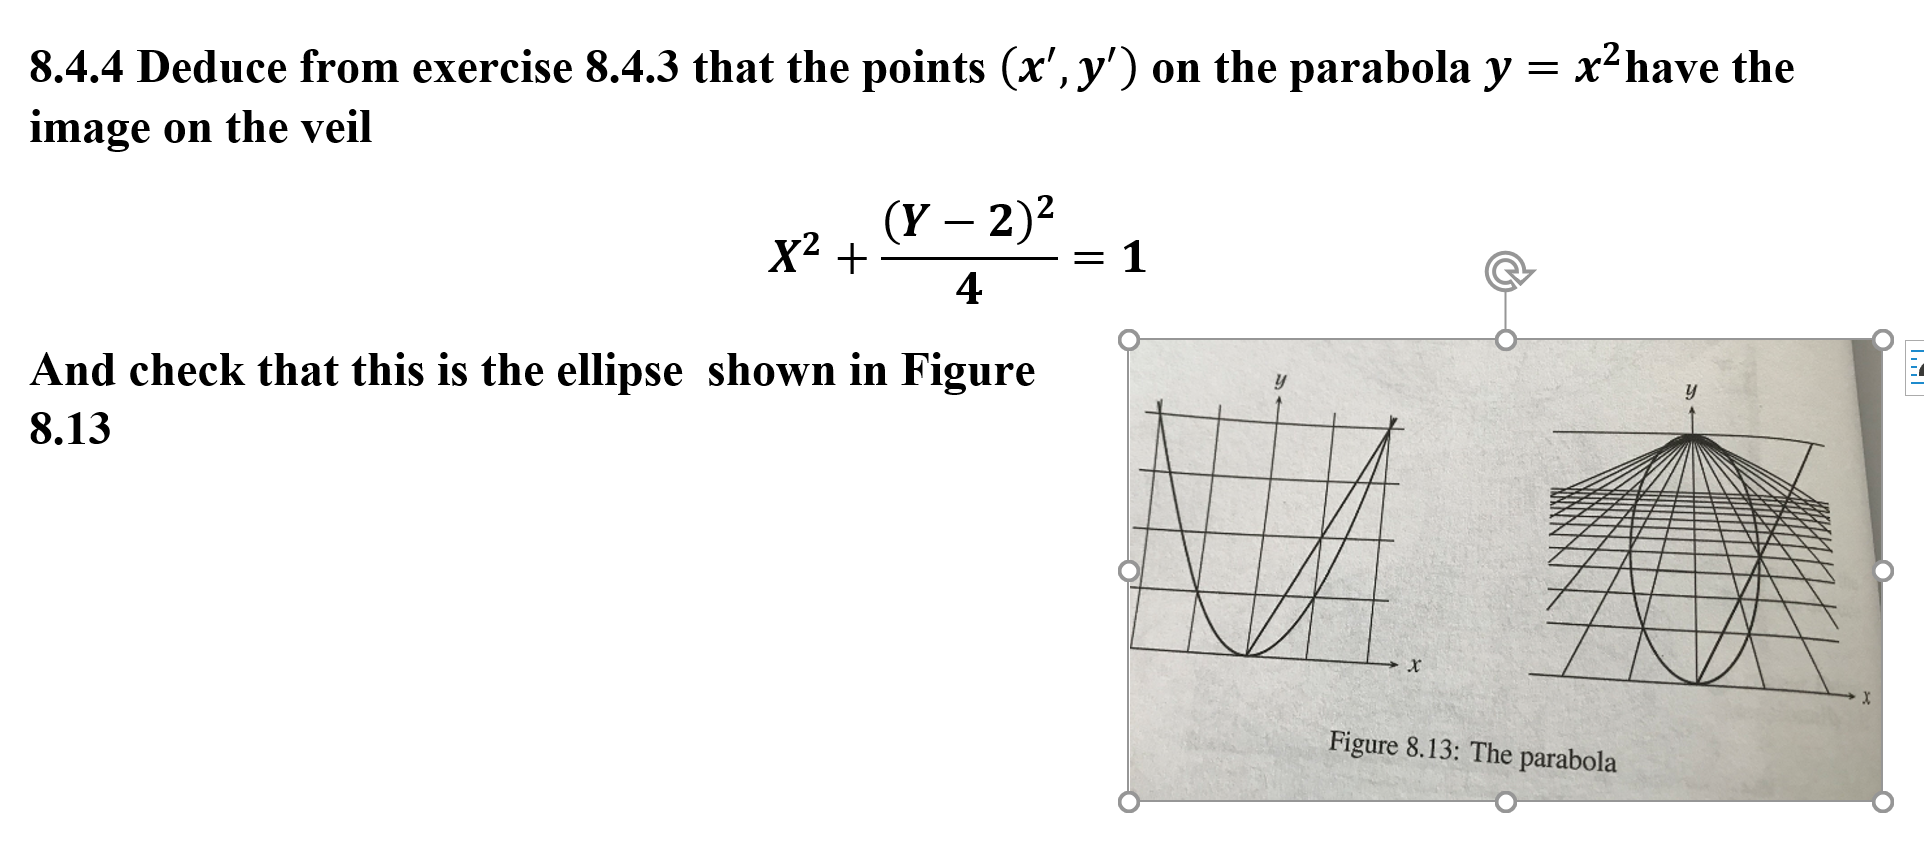 x2have the
8.4.4 Deduce from exercise 8.4.3 that the points (x', y') on the parabola y
image on the veil
(Y 2)2
X2
1
4
And check that this is the ellipse shown in Figure
8.13
x
Figure 8.13: The parabola
